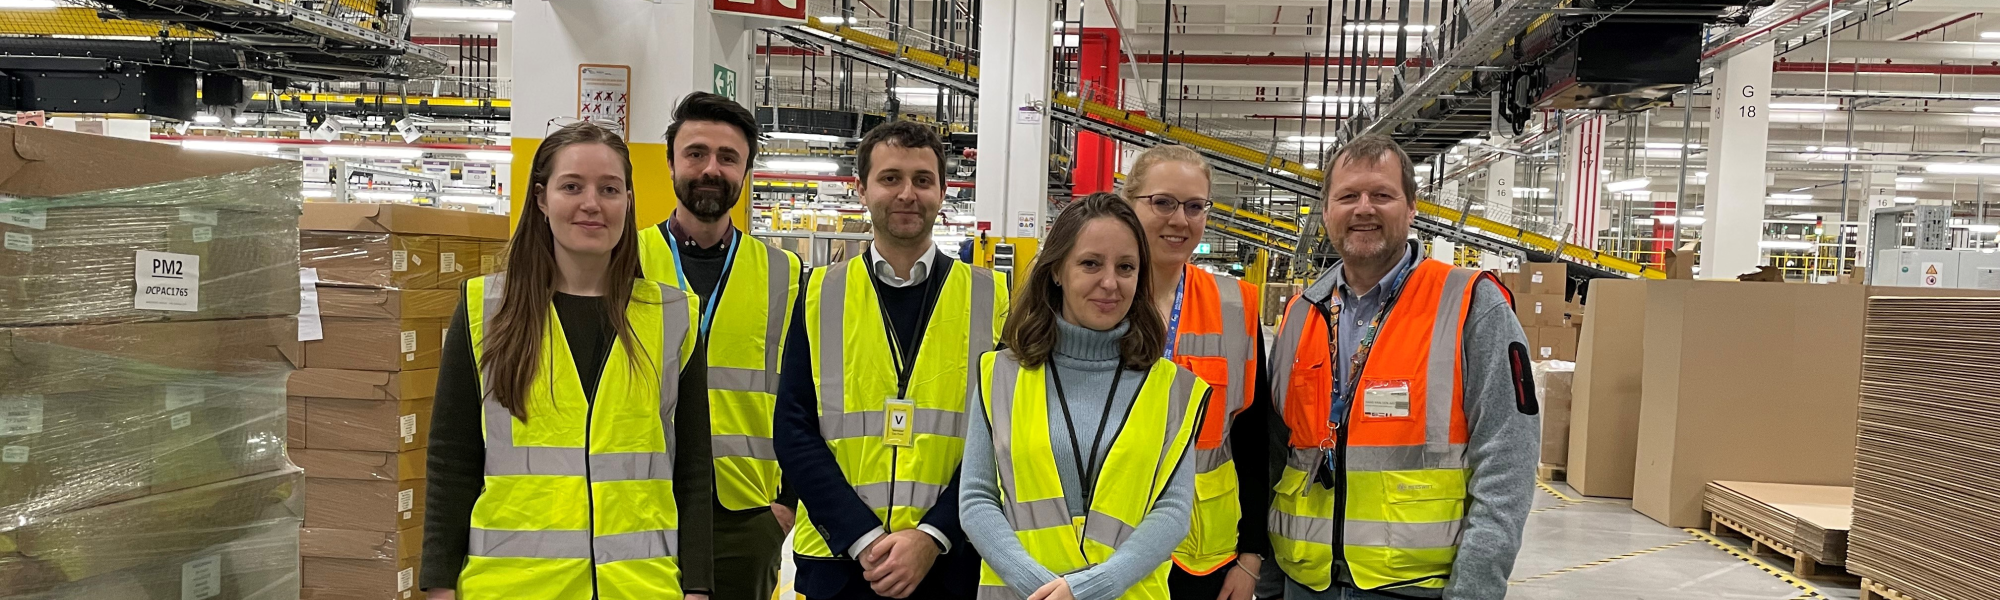 The IRU Brussels team recently visited one of Amazon’s largest fulfillment centres in Europe to better understand the company’s community-based decarbonisation and driver shortage strategies.